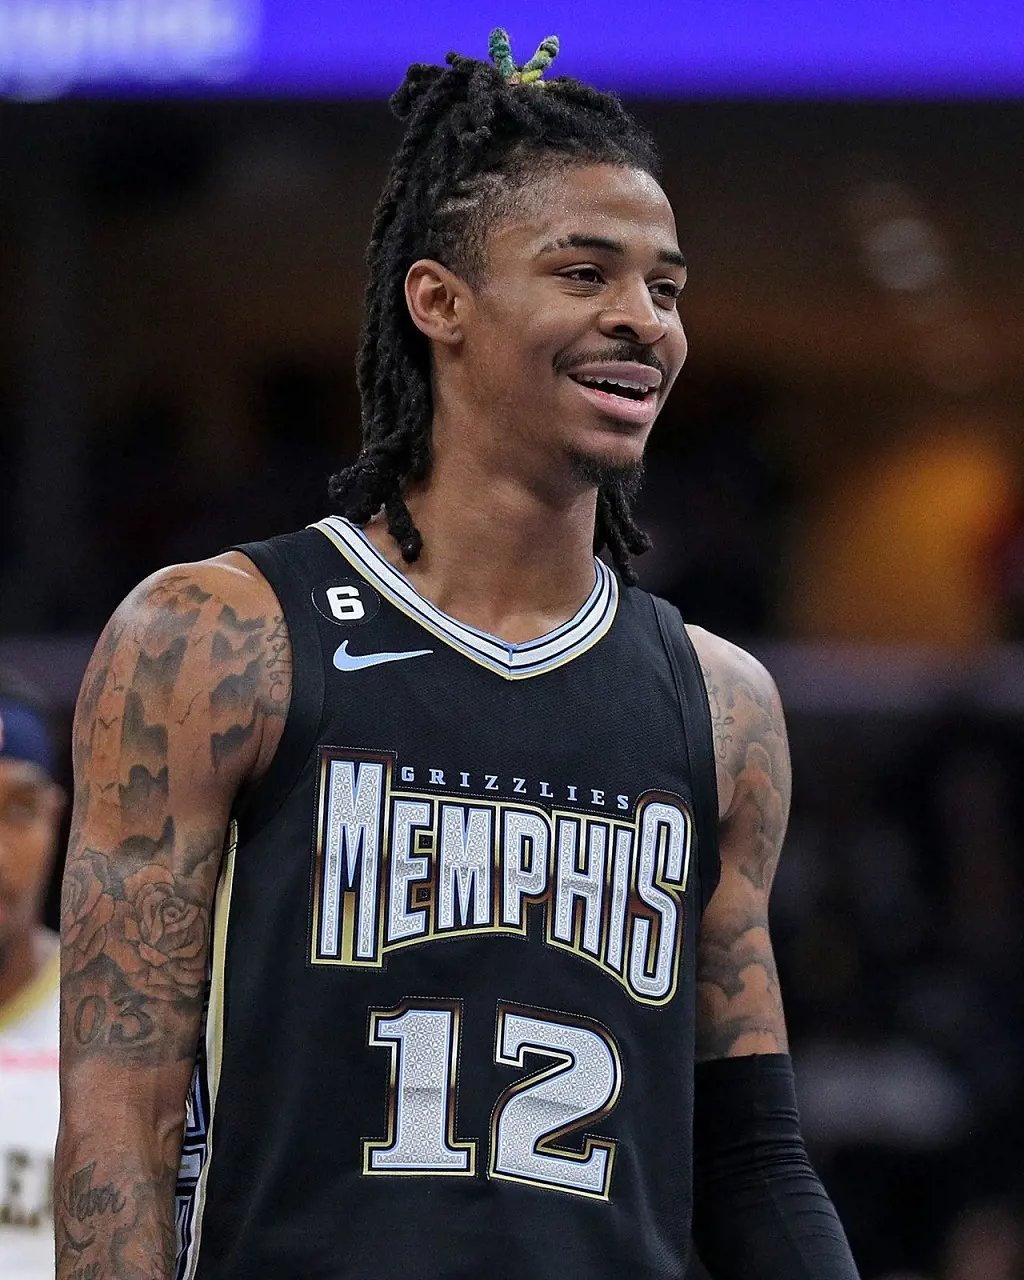 Ja Morant has a distinctive sense of fashion with long dreads and arms filled with tattoos